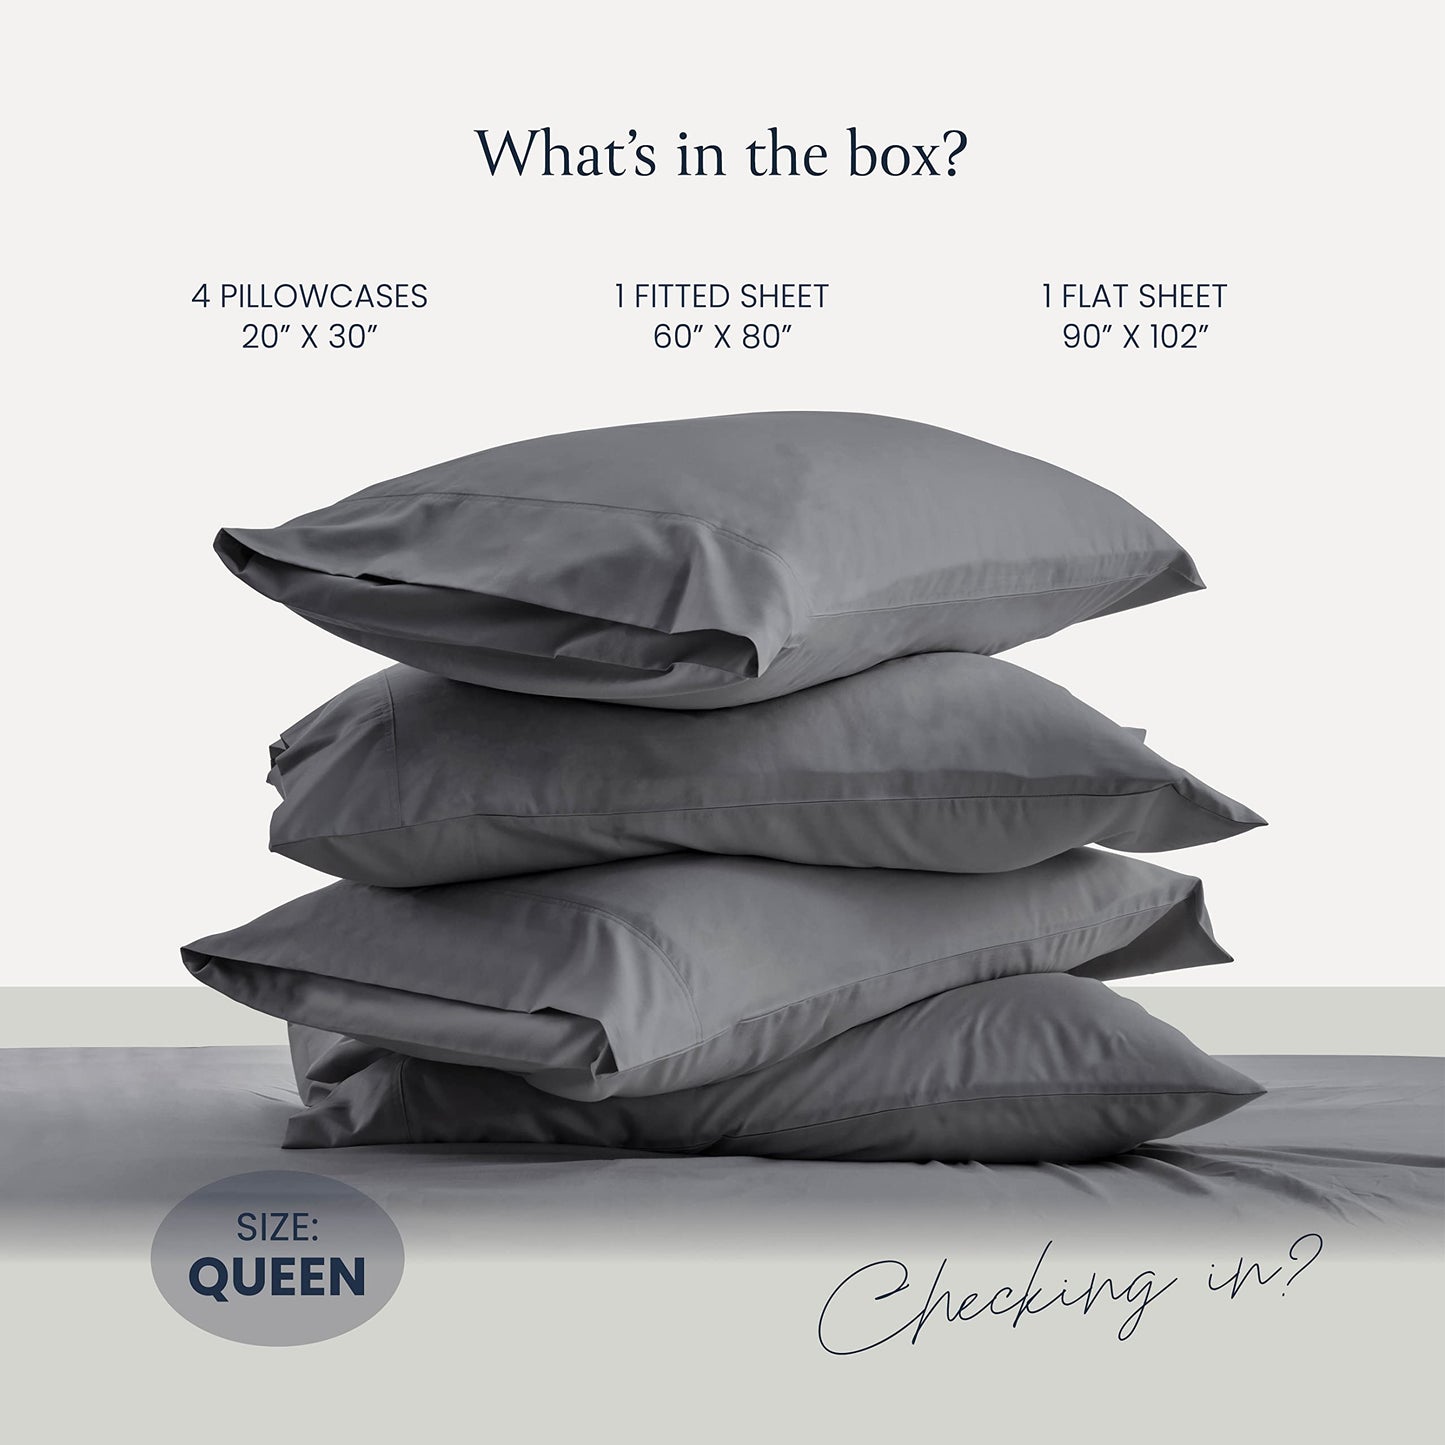 BELADOR Silky Soft Sheet Set - Luxury 6 Piece Bed Sheets for Queen Size Bed, Secure-Fit Deep Pocket Sheets with Elastic, Breathable Hotel Sheets & Pillowcase Set, Wrinkle Free Oeko-Tex Sheets